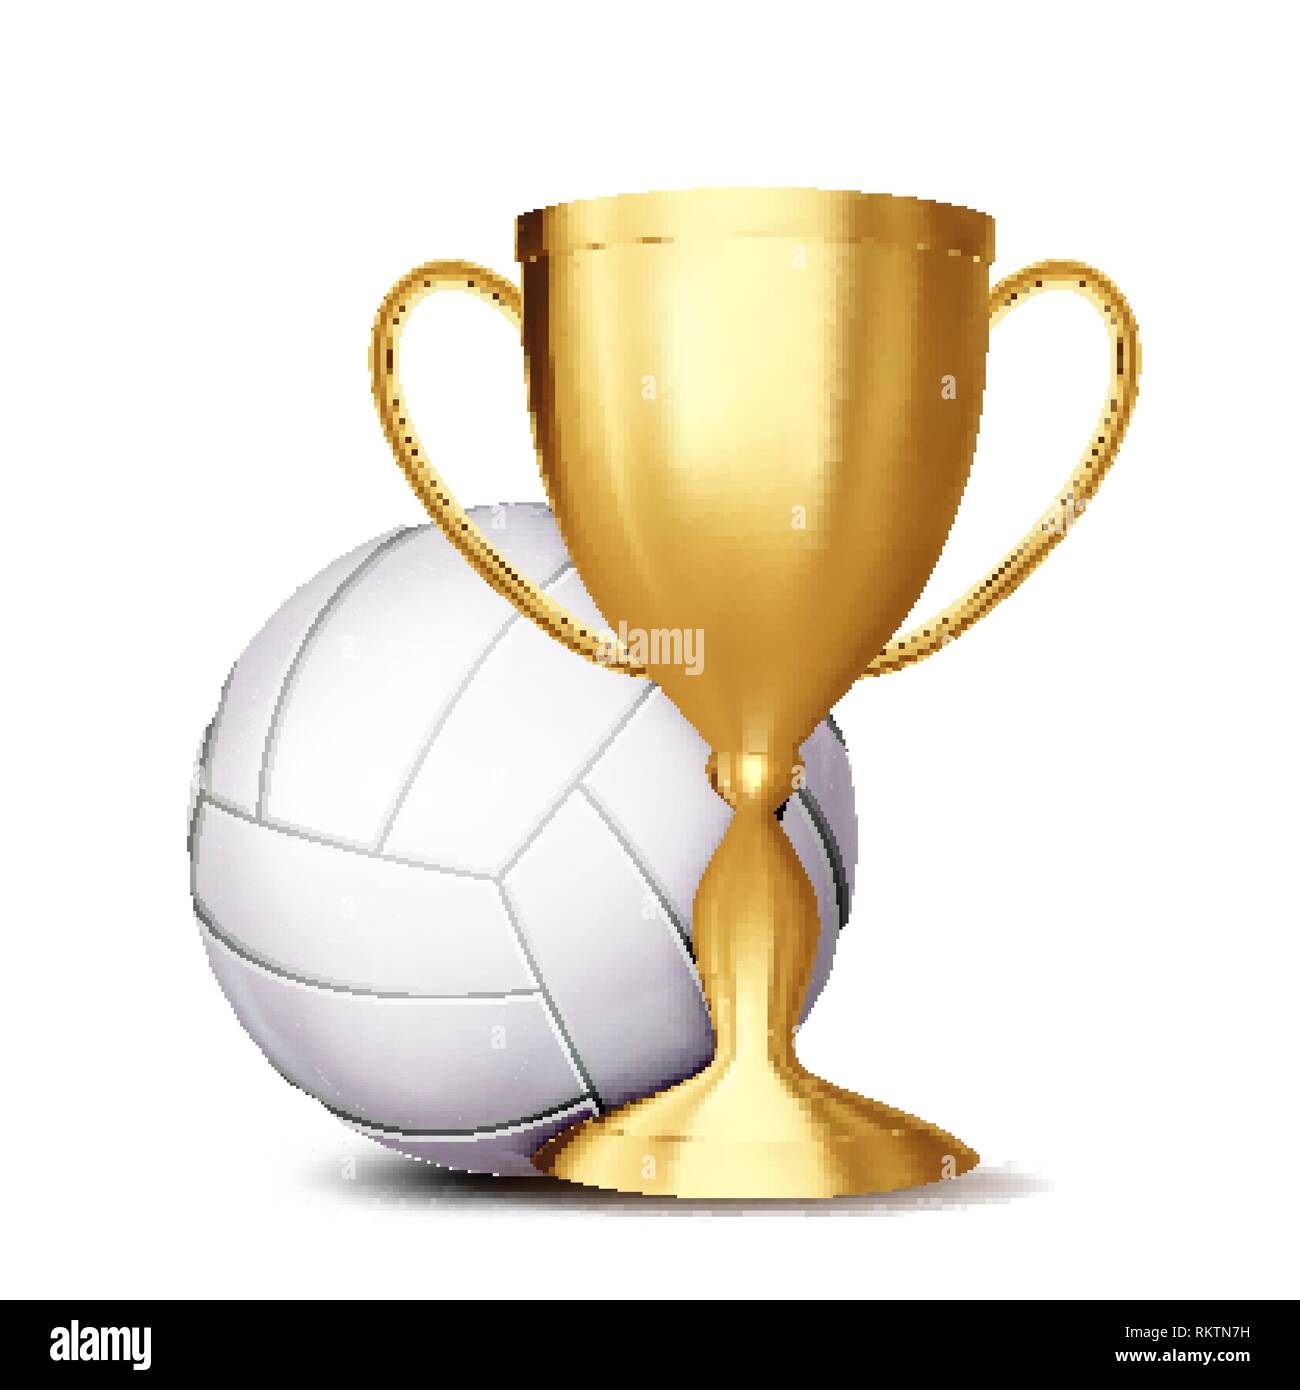 Volleyball Award Vector. Volleyball Ball, Golden Cup. For Sport Promotion. Tournament, Championship Flyer Design. Volleyball Club, Academy. Invitation Stock Vector